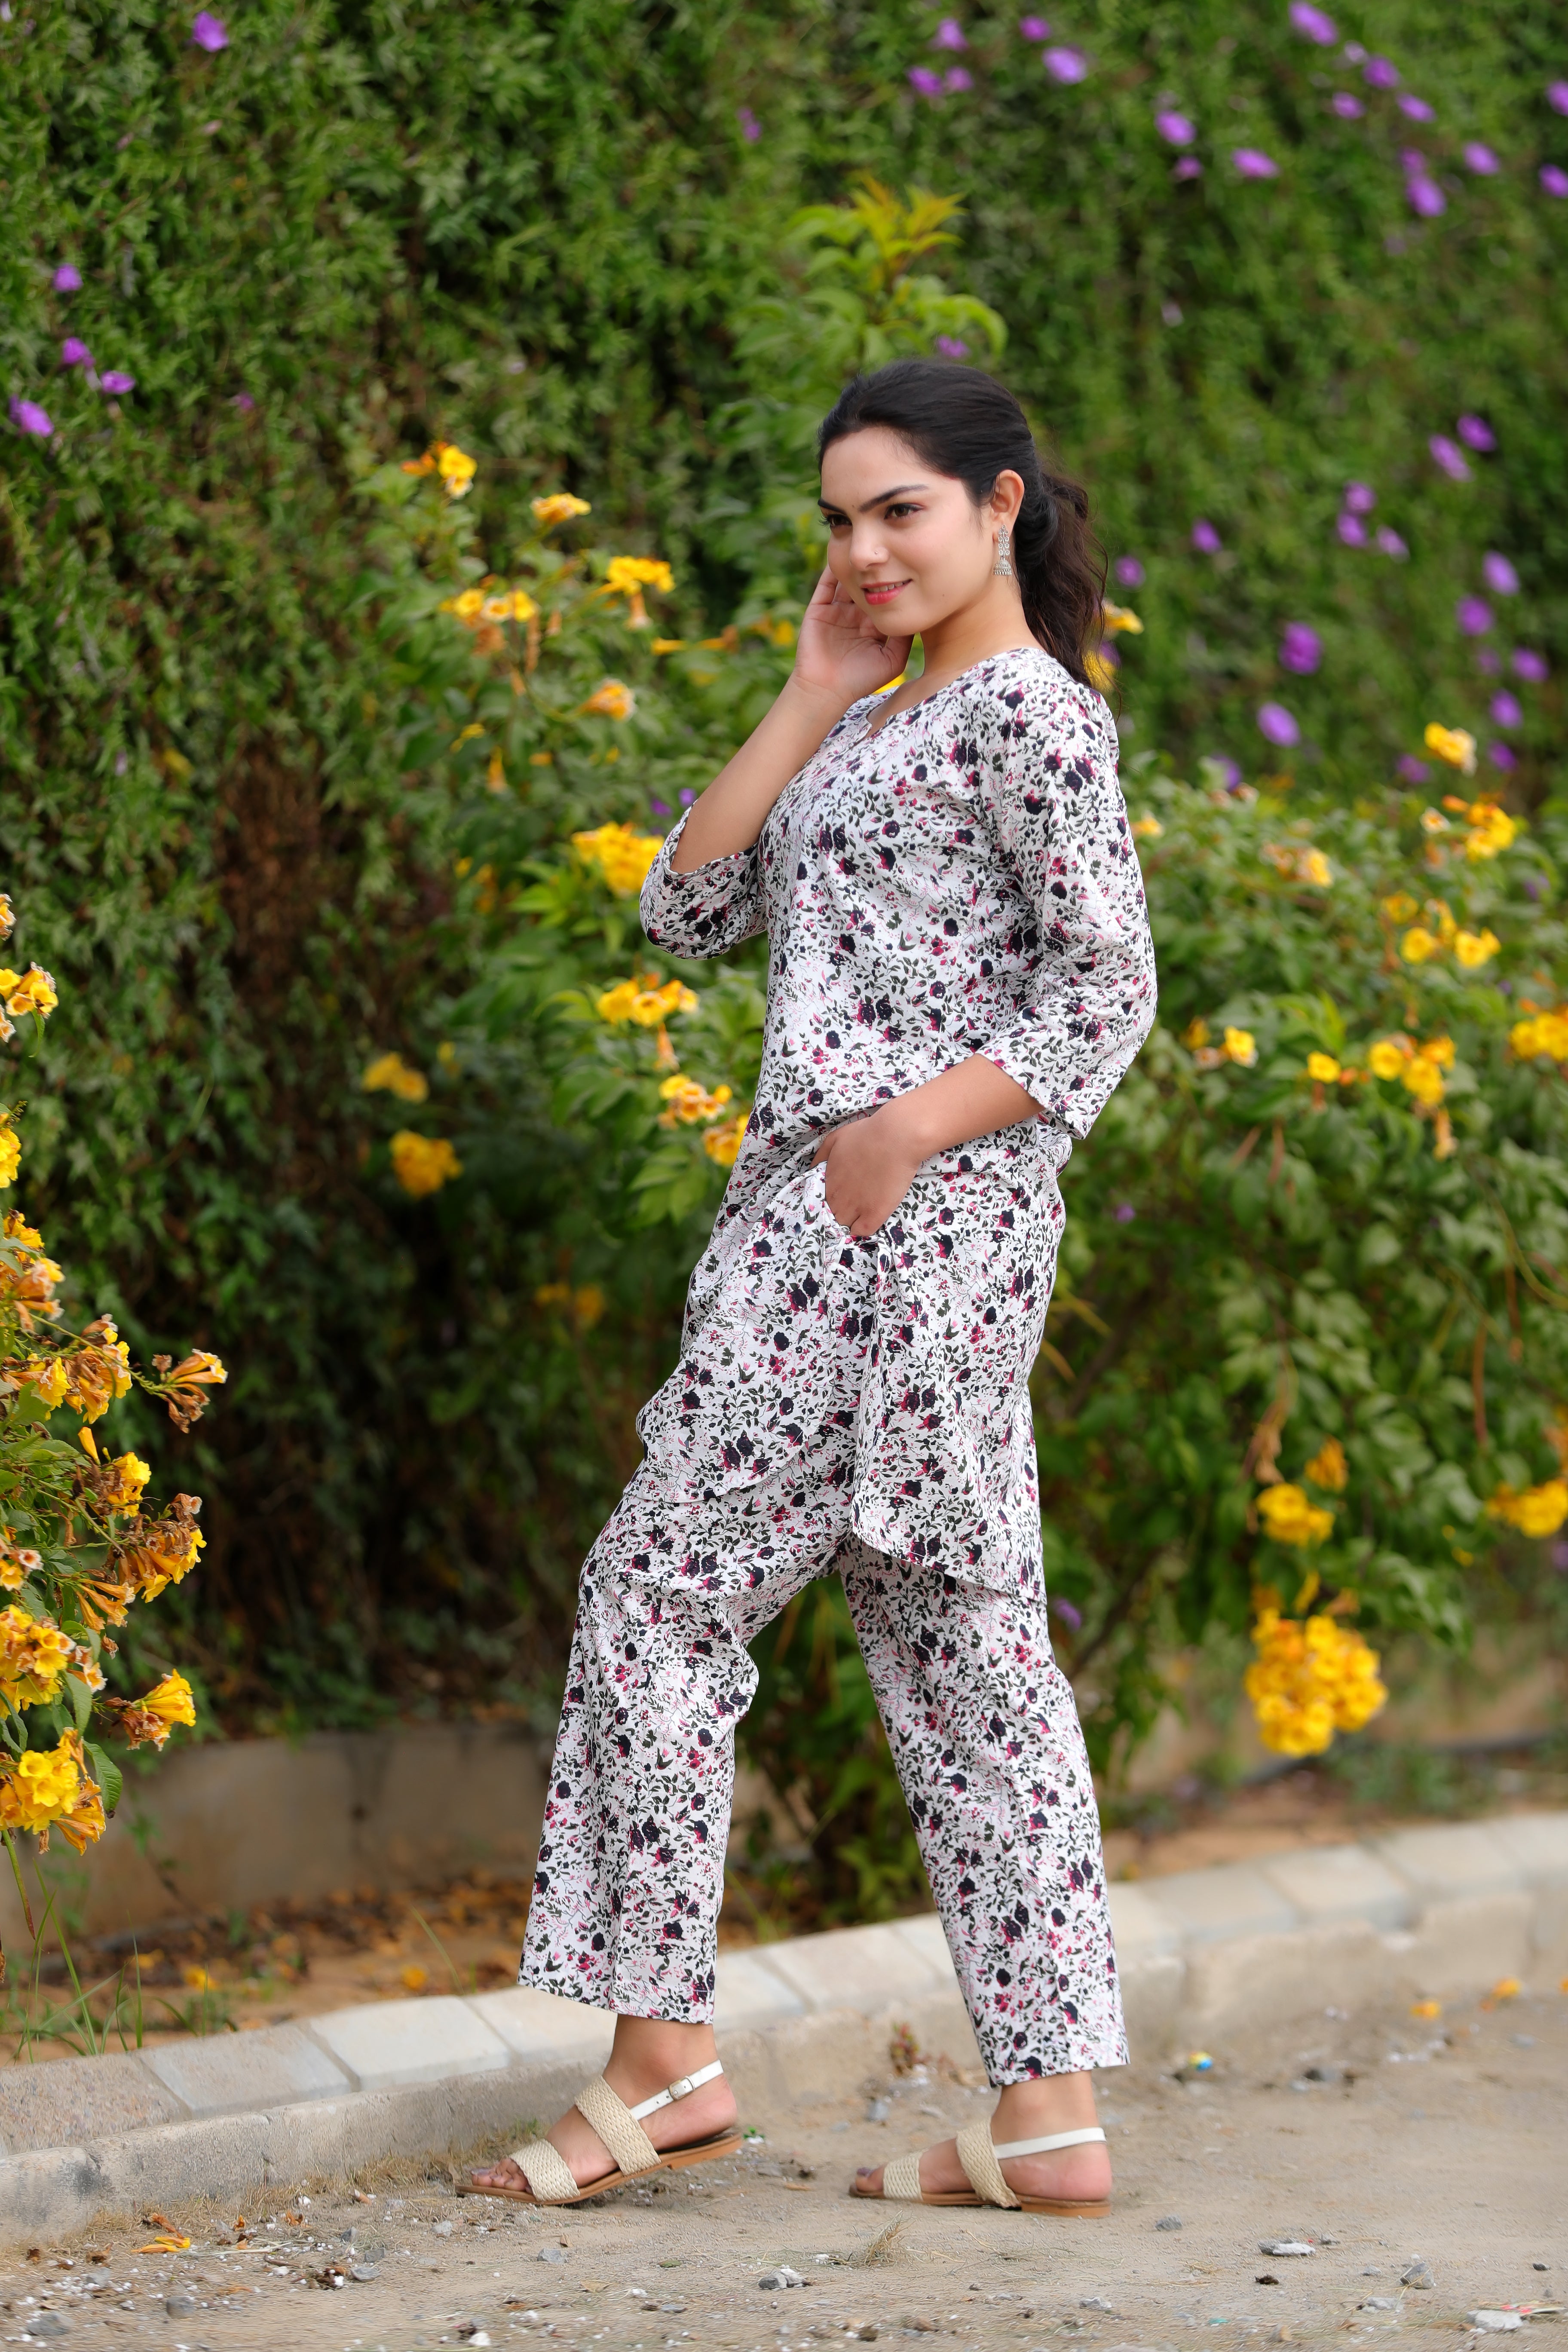 Chic White and Black Floral Printed Night Suit